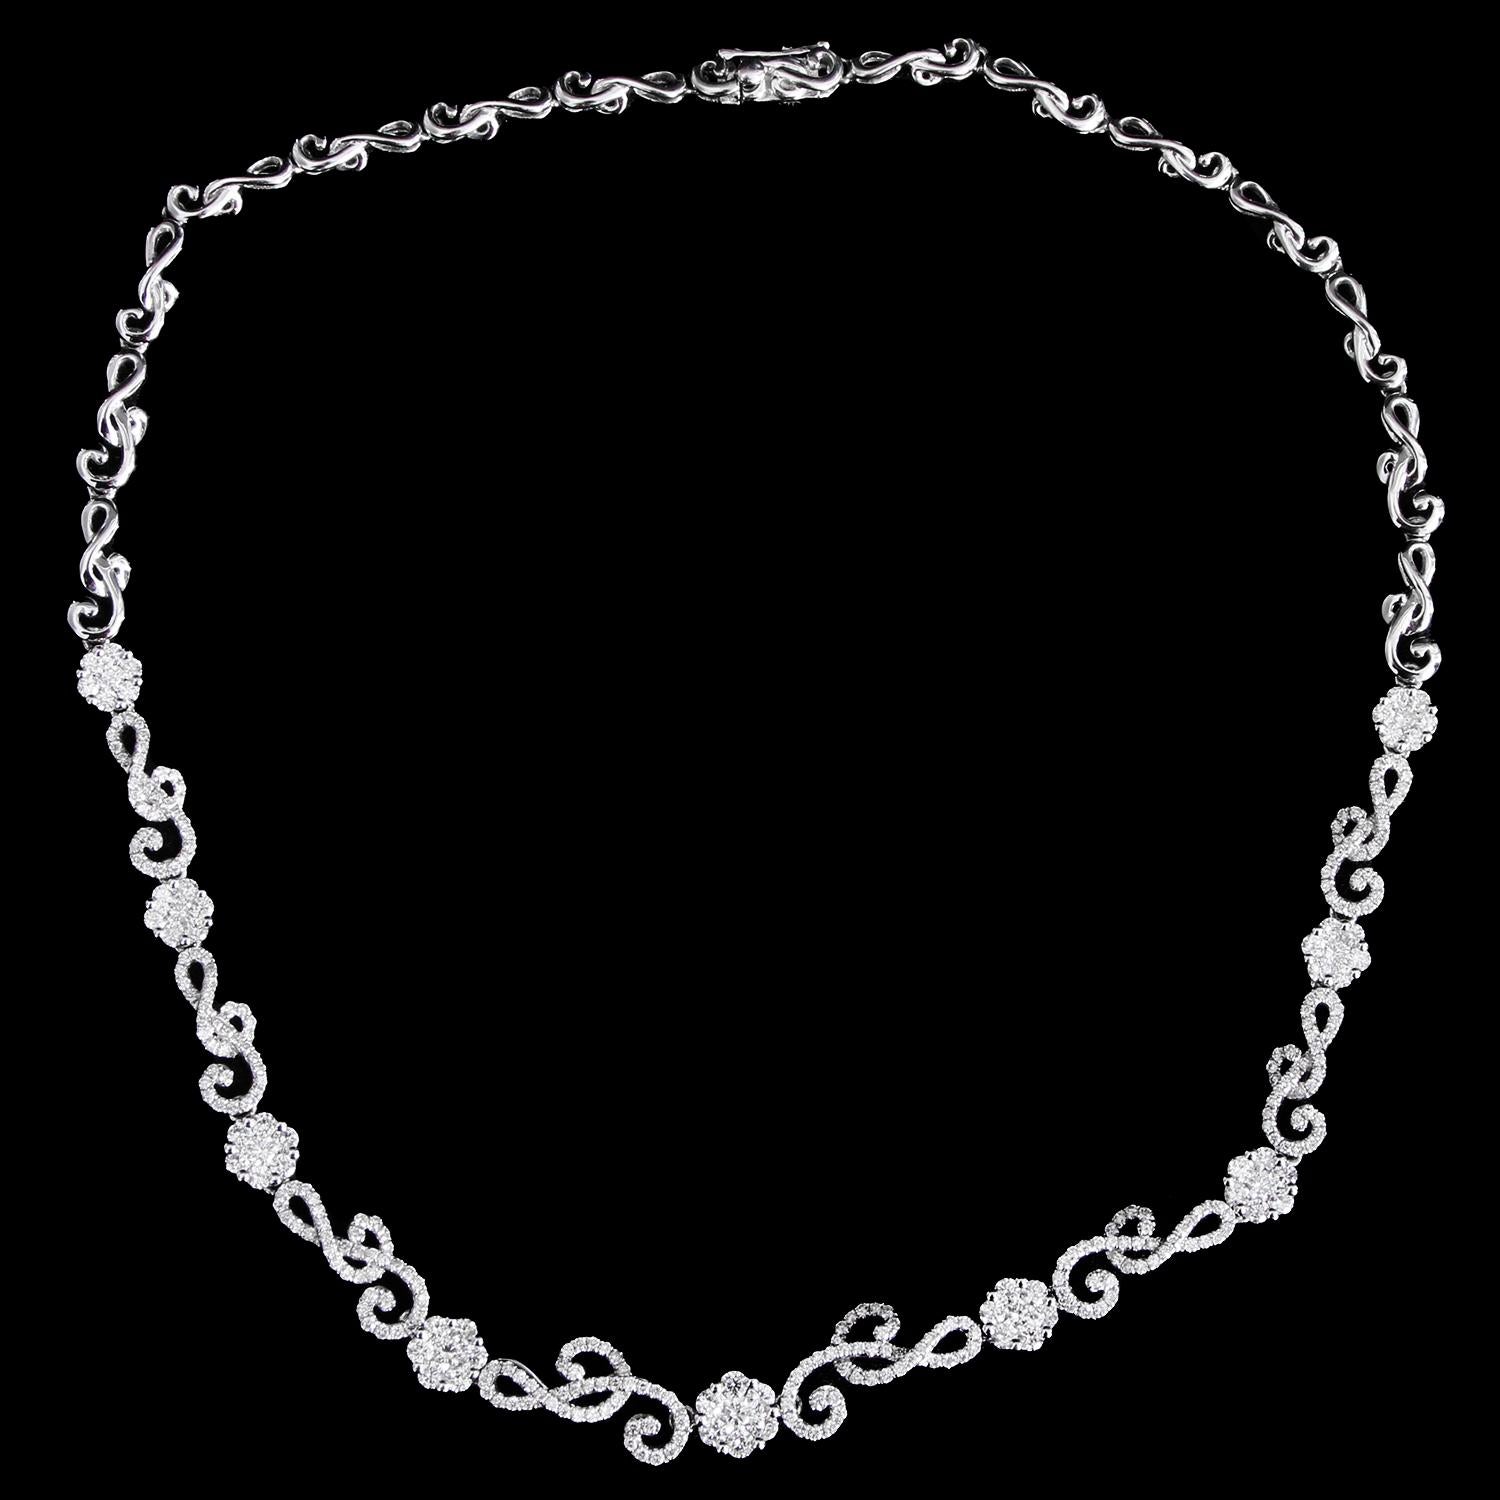 JD 18K White Gold  Diamond Necklace - Approx.. 1.5 cts of diamonds pave set in a beautiful flower design. Perfectly sits on your neck. Measures 14 inches. total weight 17 grams. .